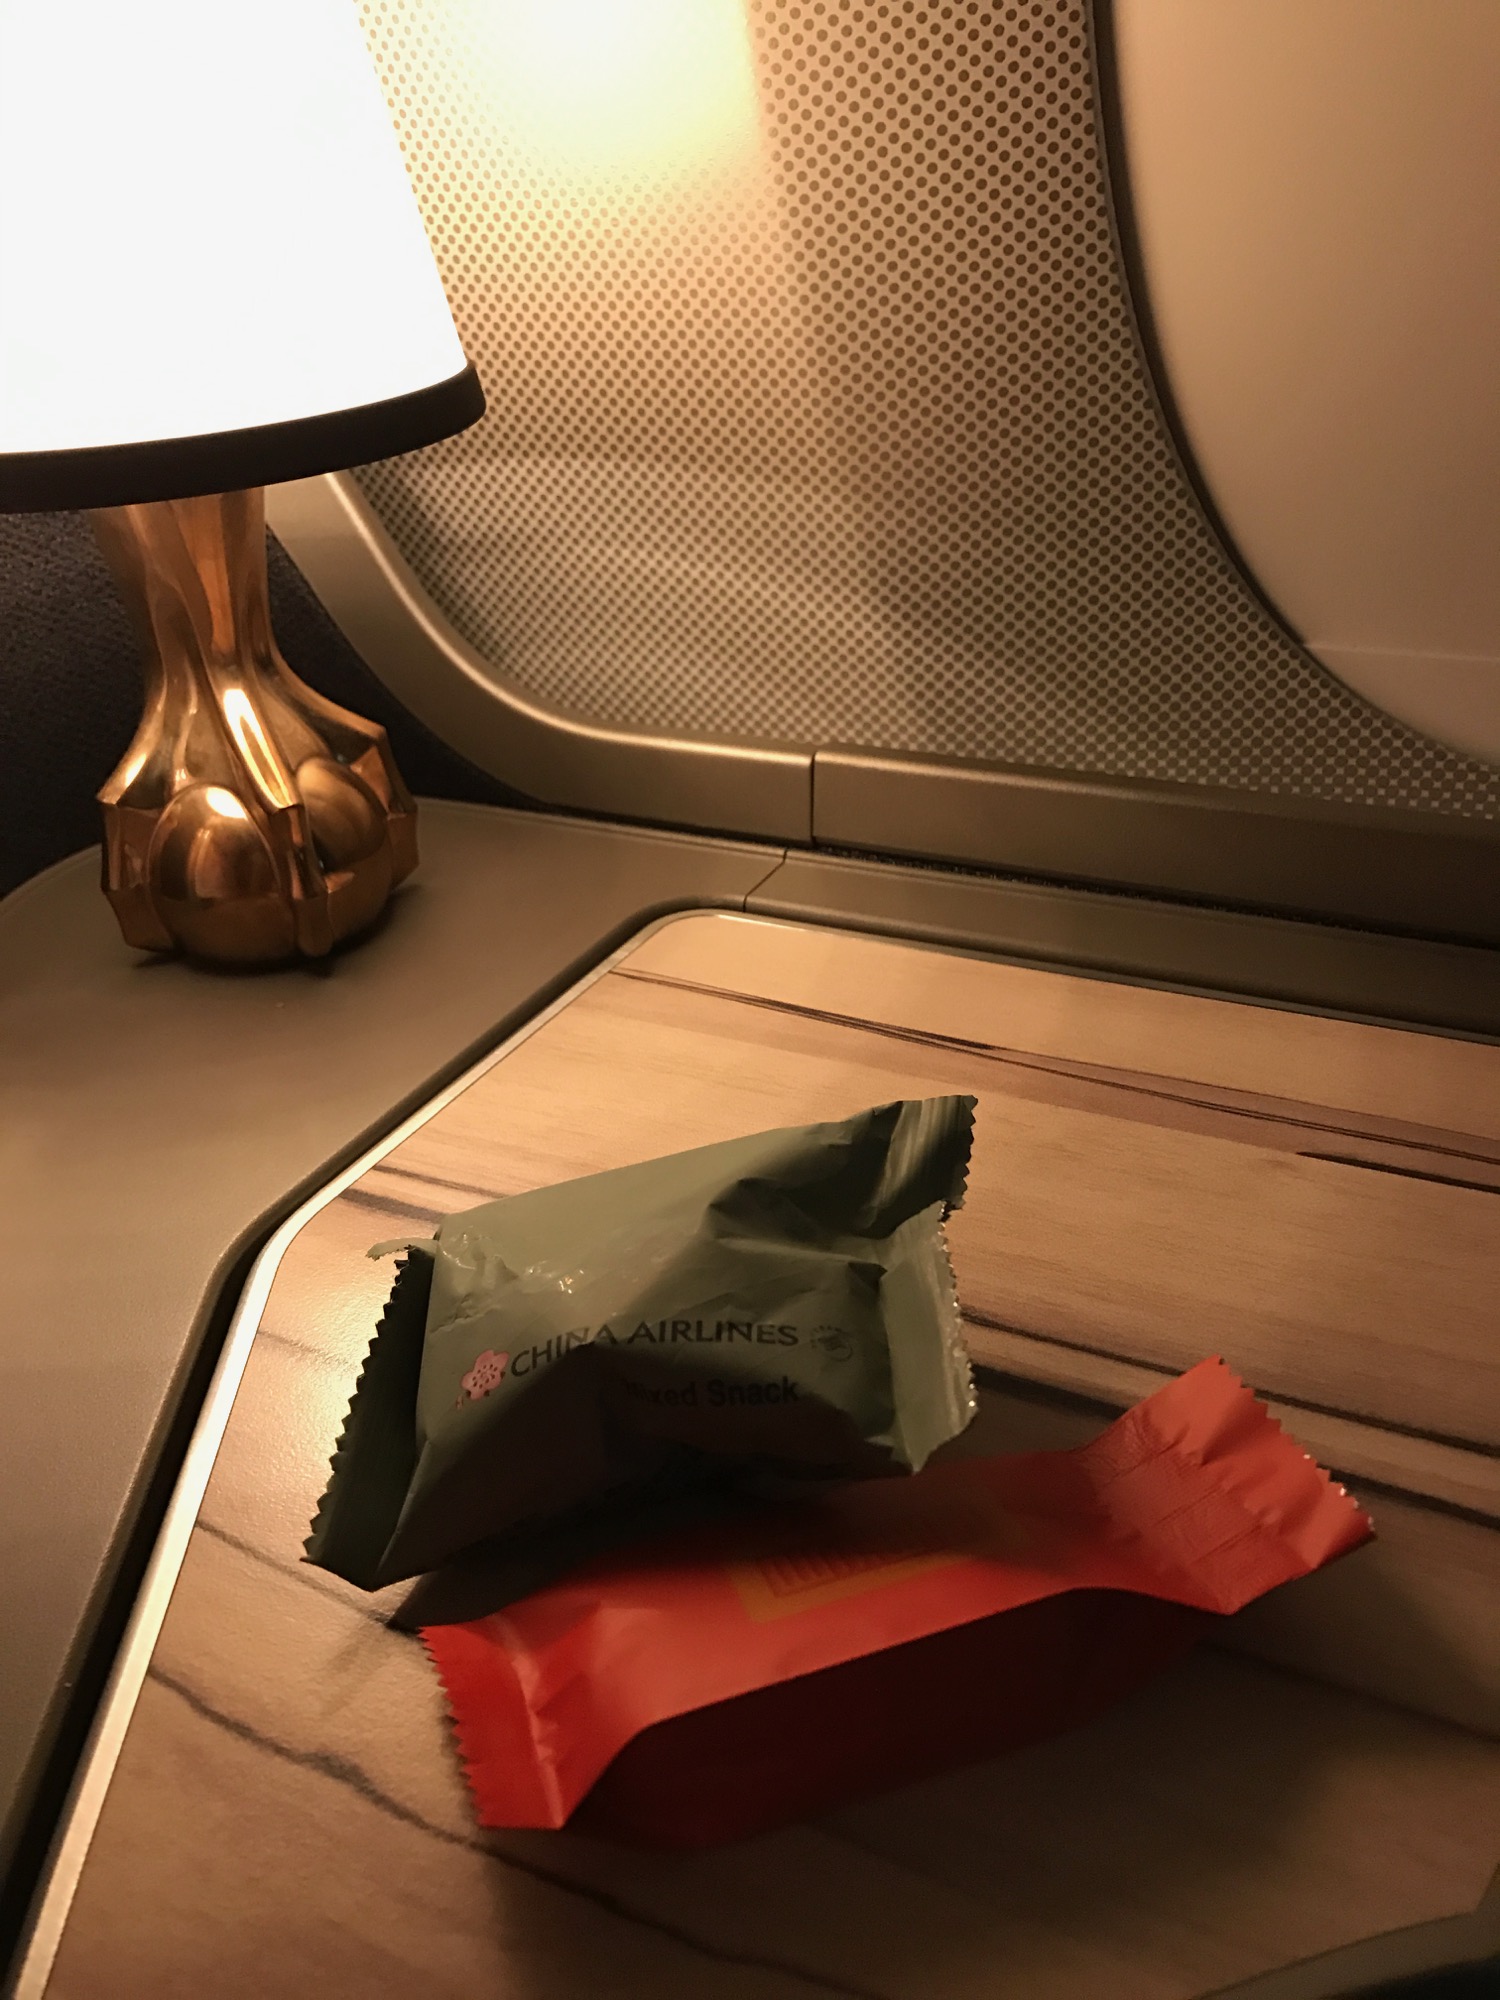 China Airlines A350 Business Class Review - 100